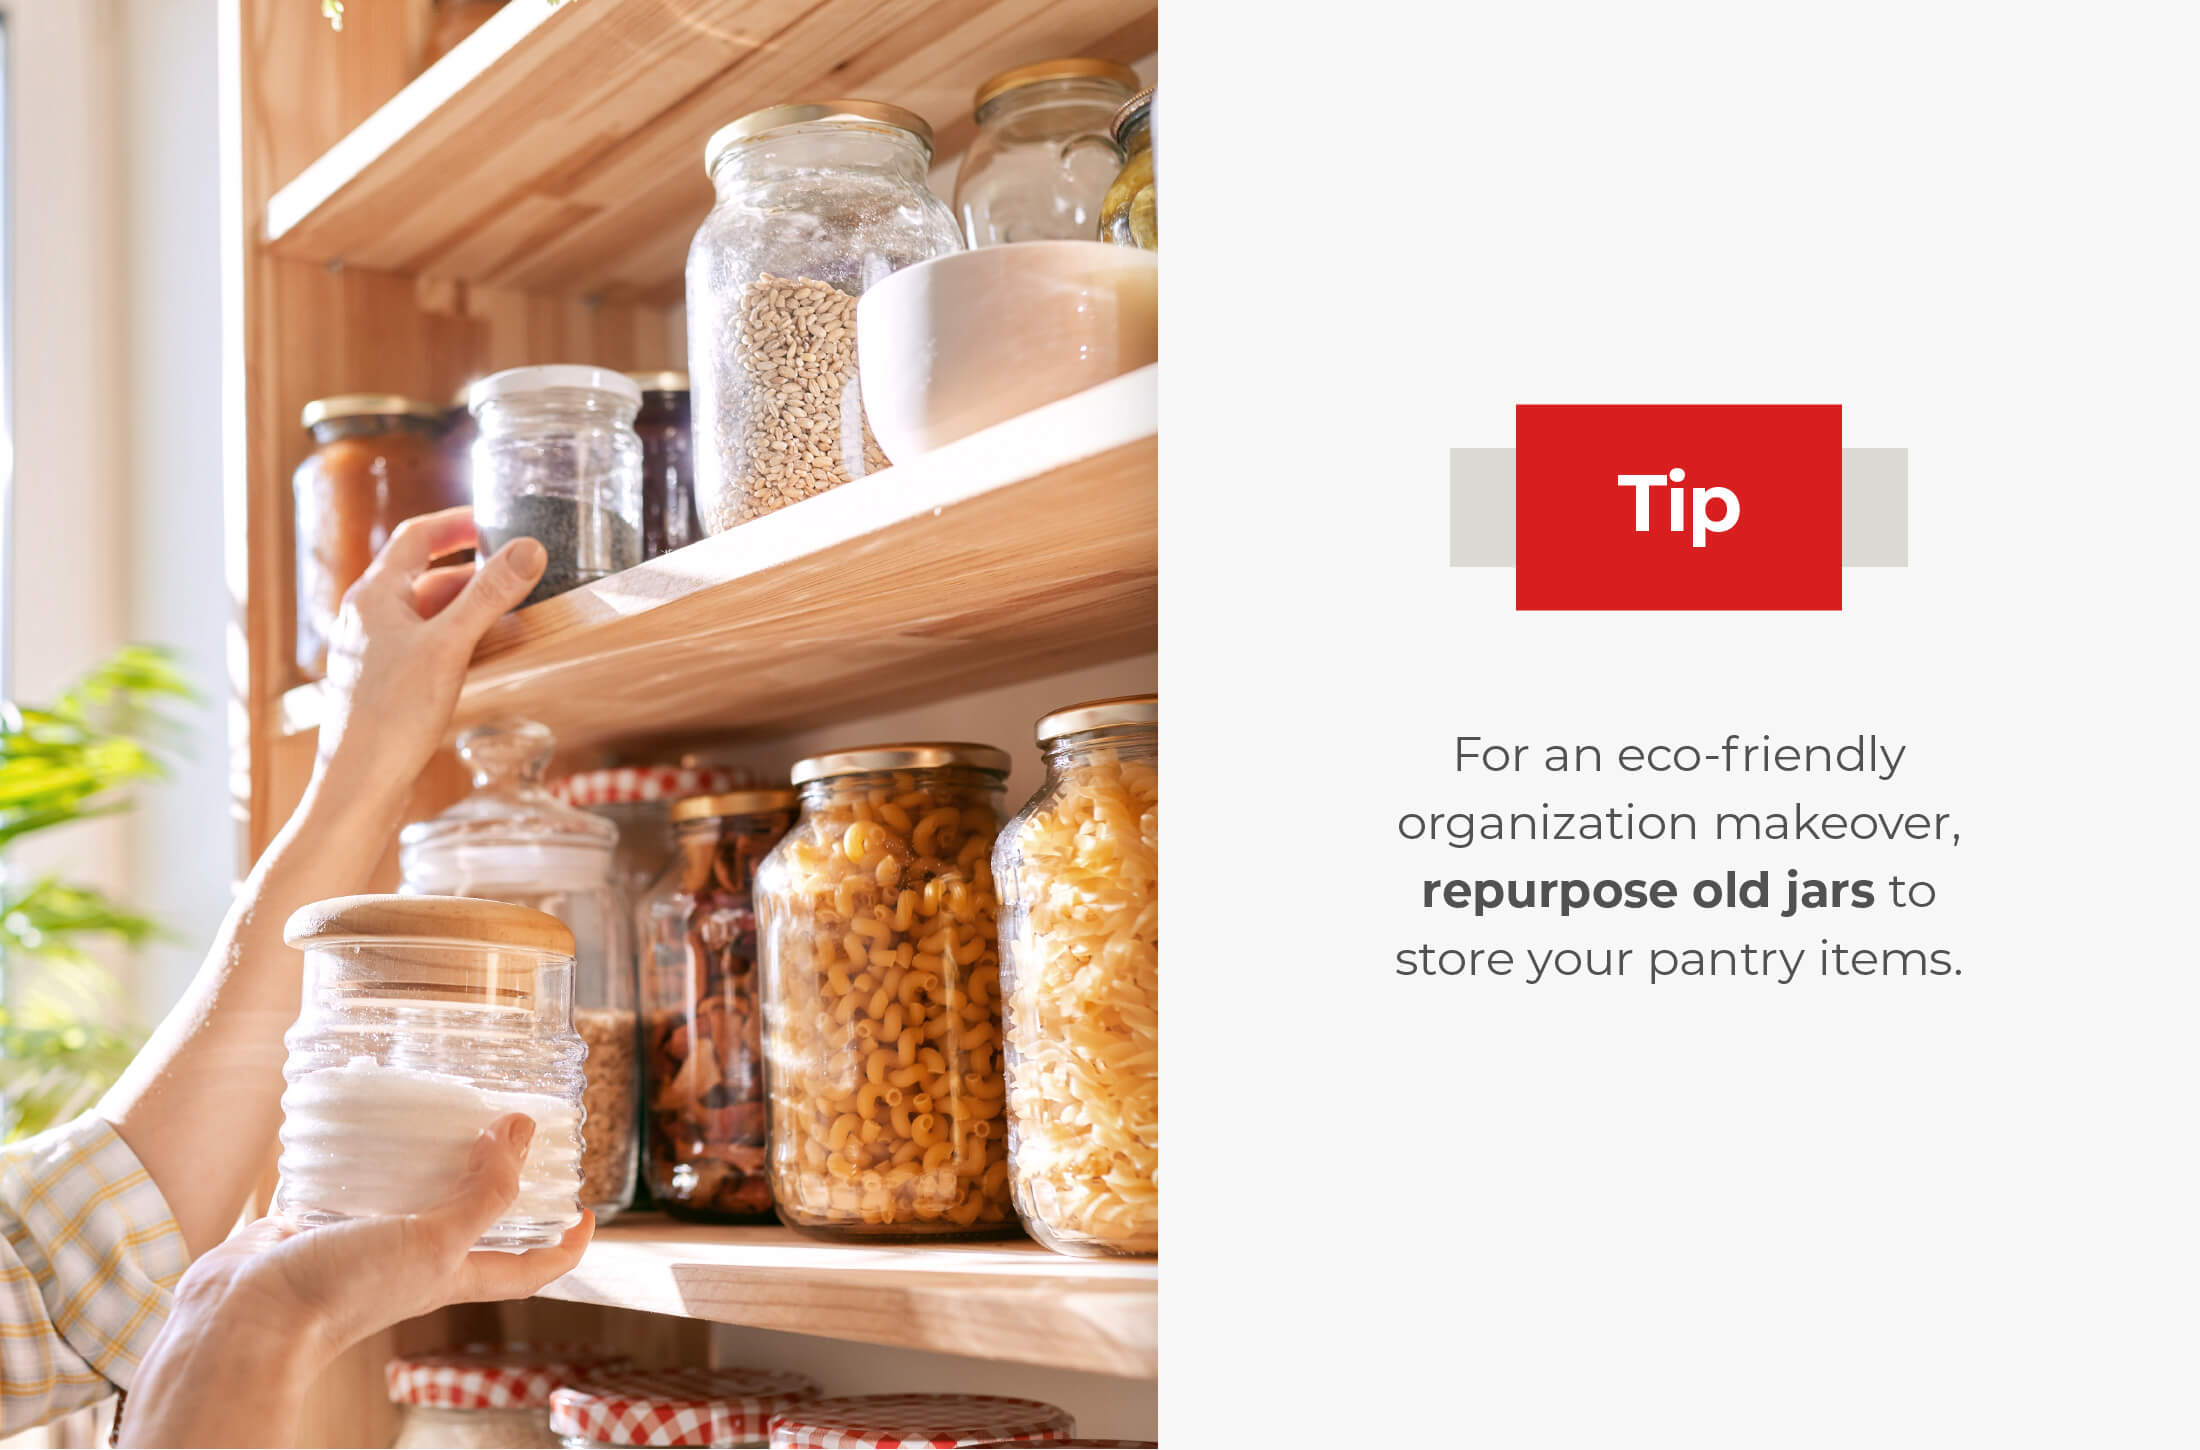 For an eco-friendly organization makeover, repurpose old jars to store your pantry items.